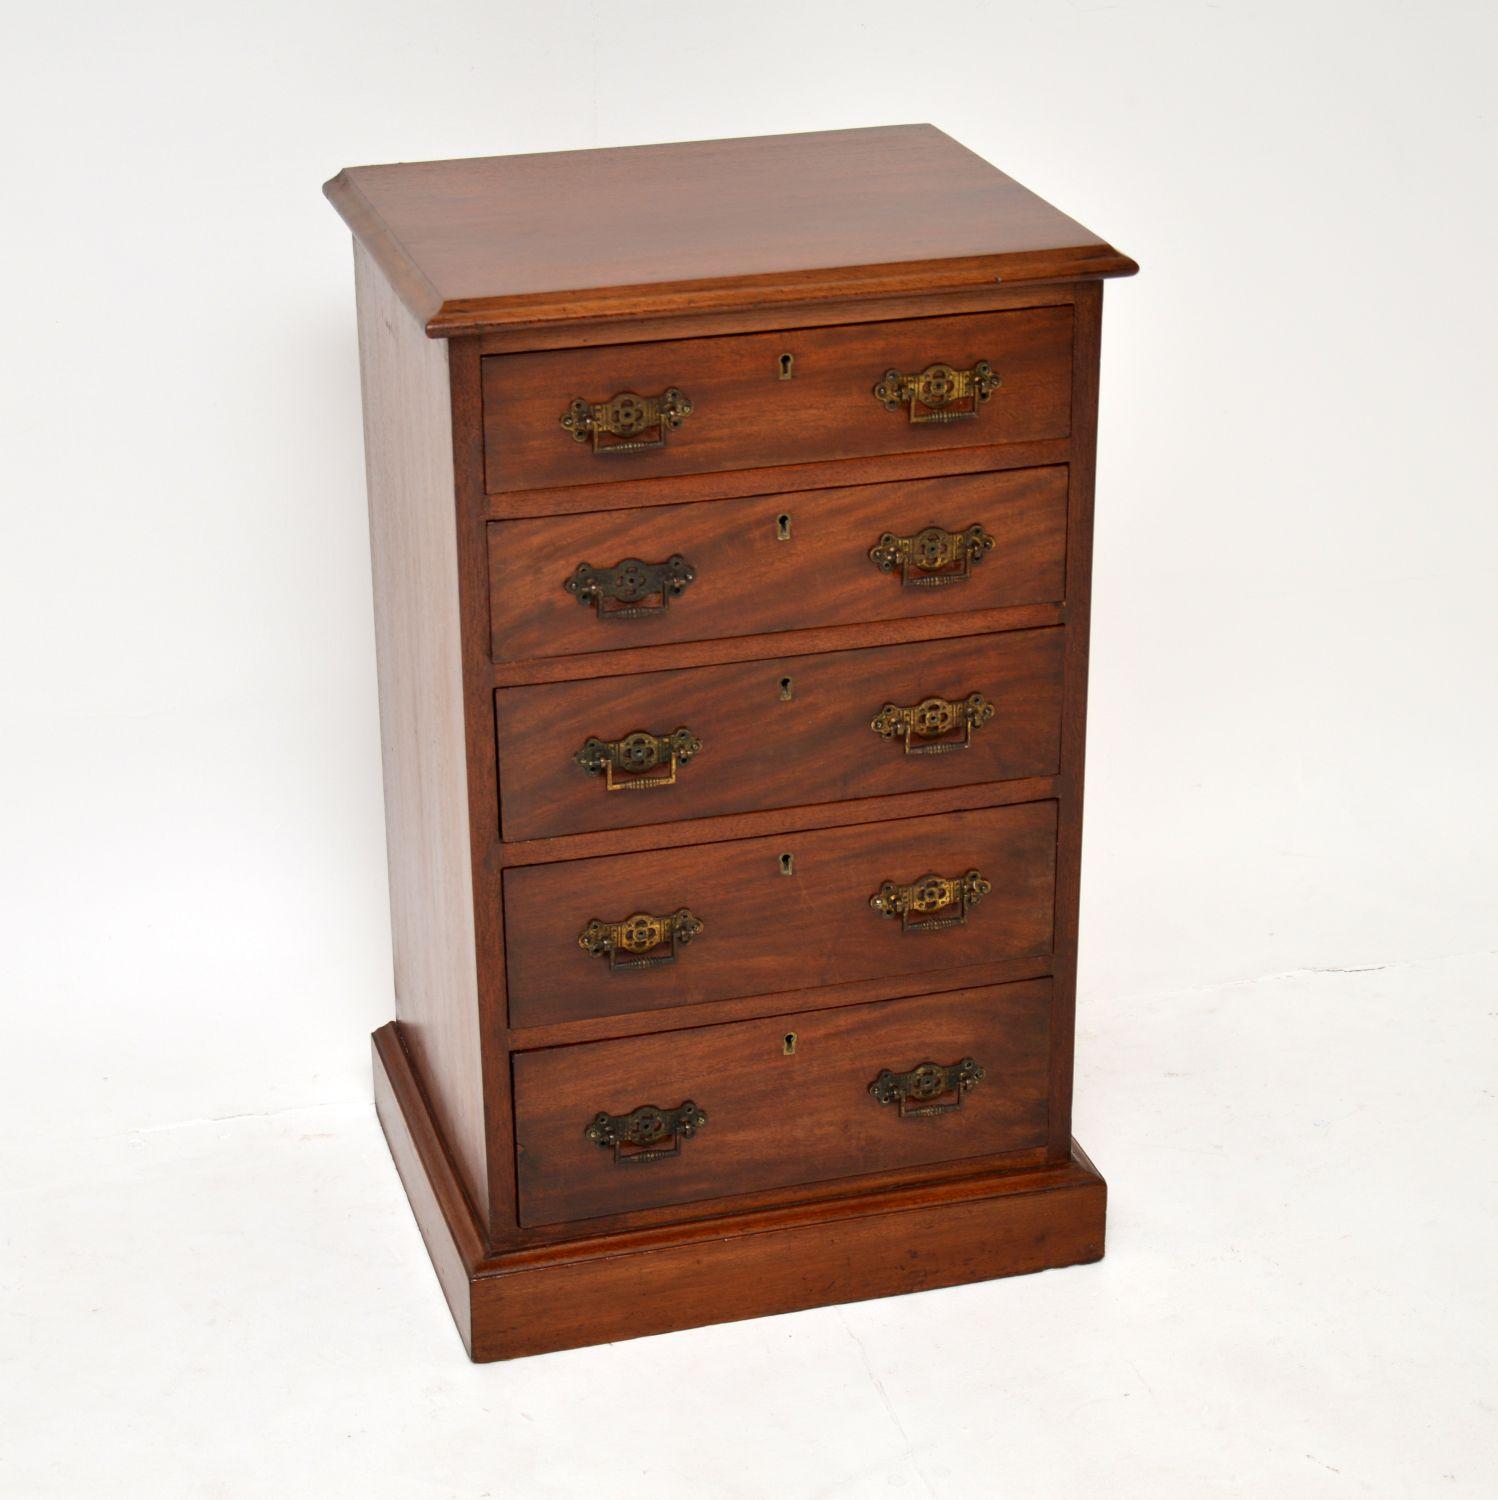 A charming and quite unusual Victorian period chest of drawers. This was made in England & it dates from around 1880-1890’s period.

The quality is amazing, with solid wood construction throughout. This is quite small and compact, it’s a very